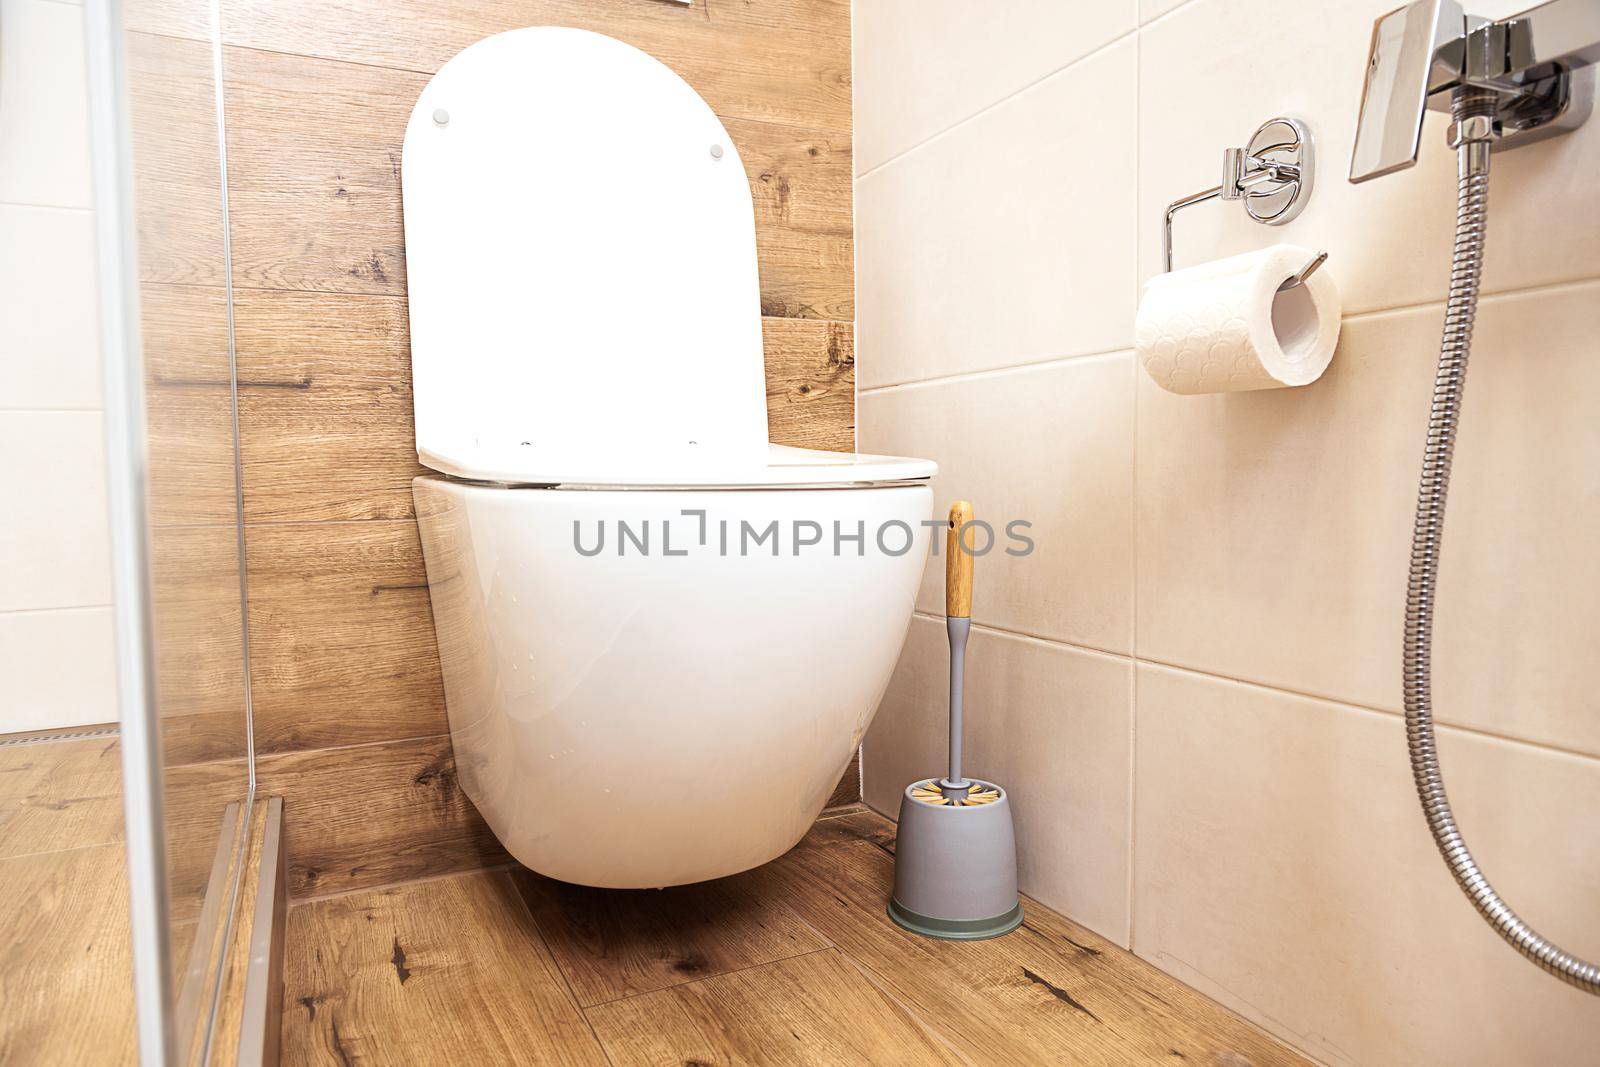 Small bathroom interior. Close-up of plumbing. white toilet bowl and hygienic bidet shower in the bathroom with ceramic tiles in natural wood-like colors and white, in a Scandinavian style.